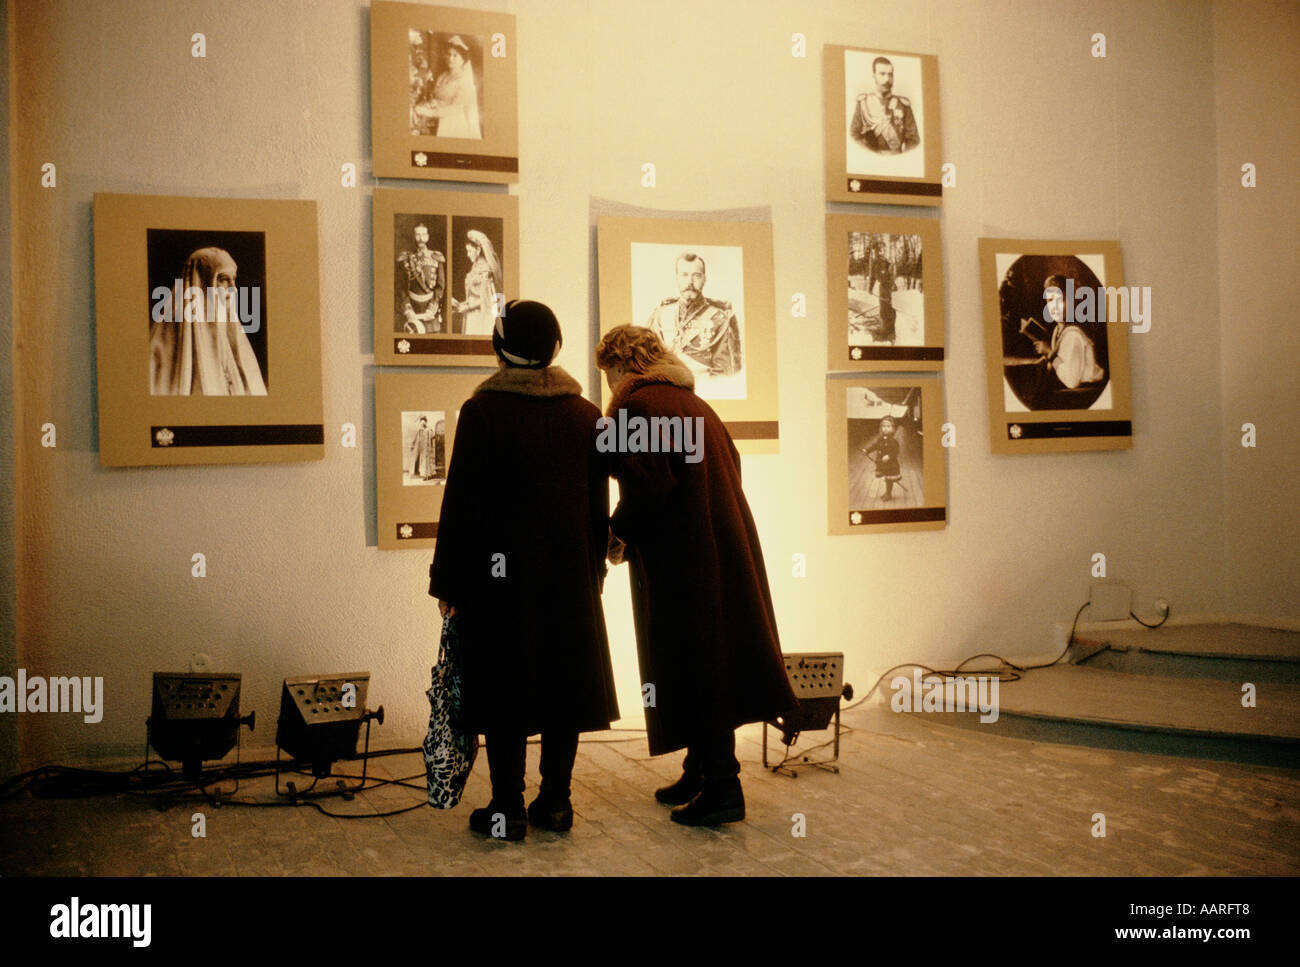 SVERDLOVSK MARCH 1991 LAST DAYS OF THE TZAR FAMILY EXHIBITION THE FIRST OF ITS KIND Stock Photo